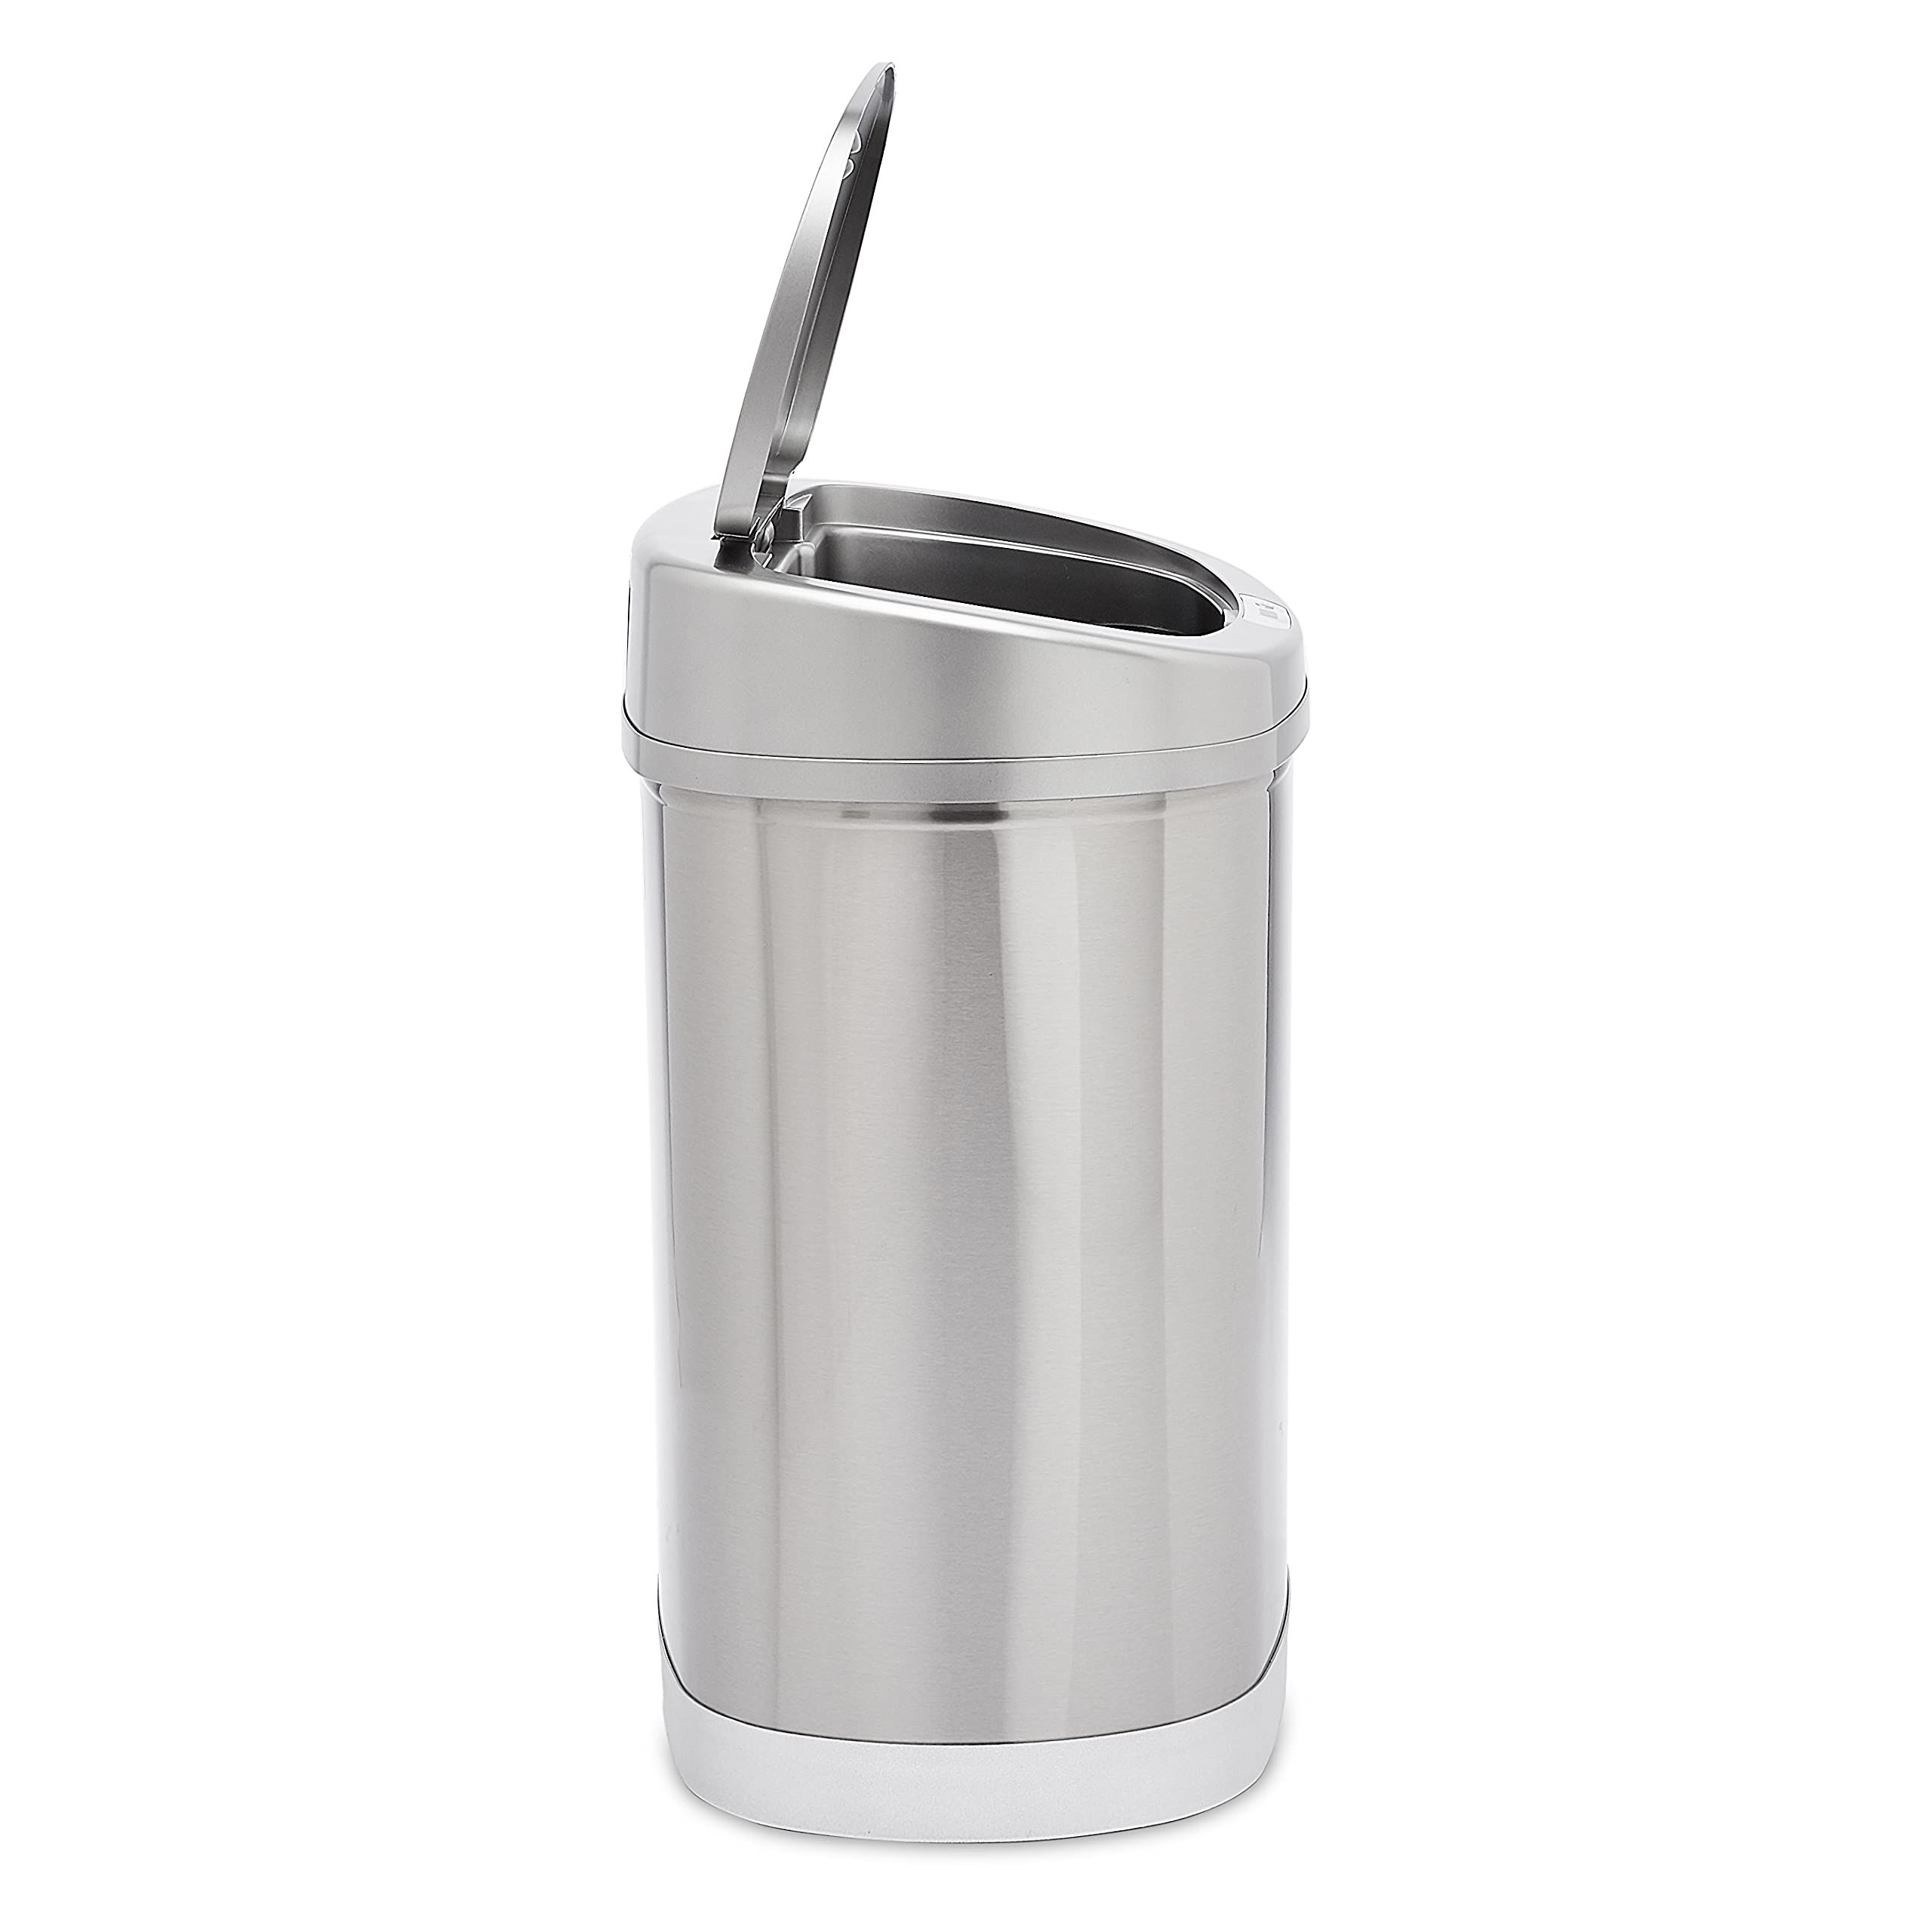 30-Liter Amazon Basics Automatic Hands-Free Stainless Steel 2-Bin Trash Can $33.90 + Free Shipping